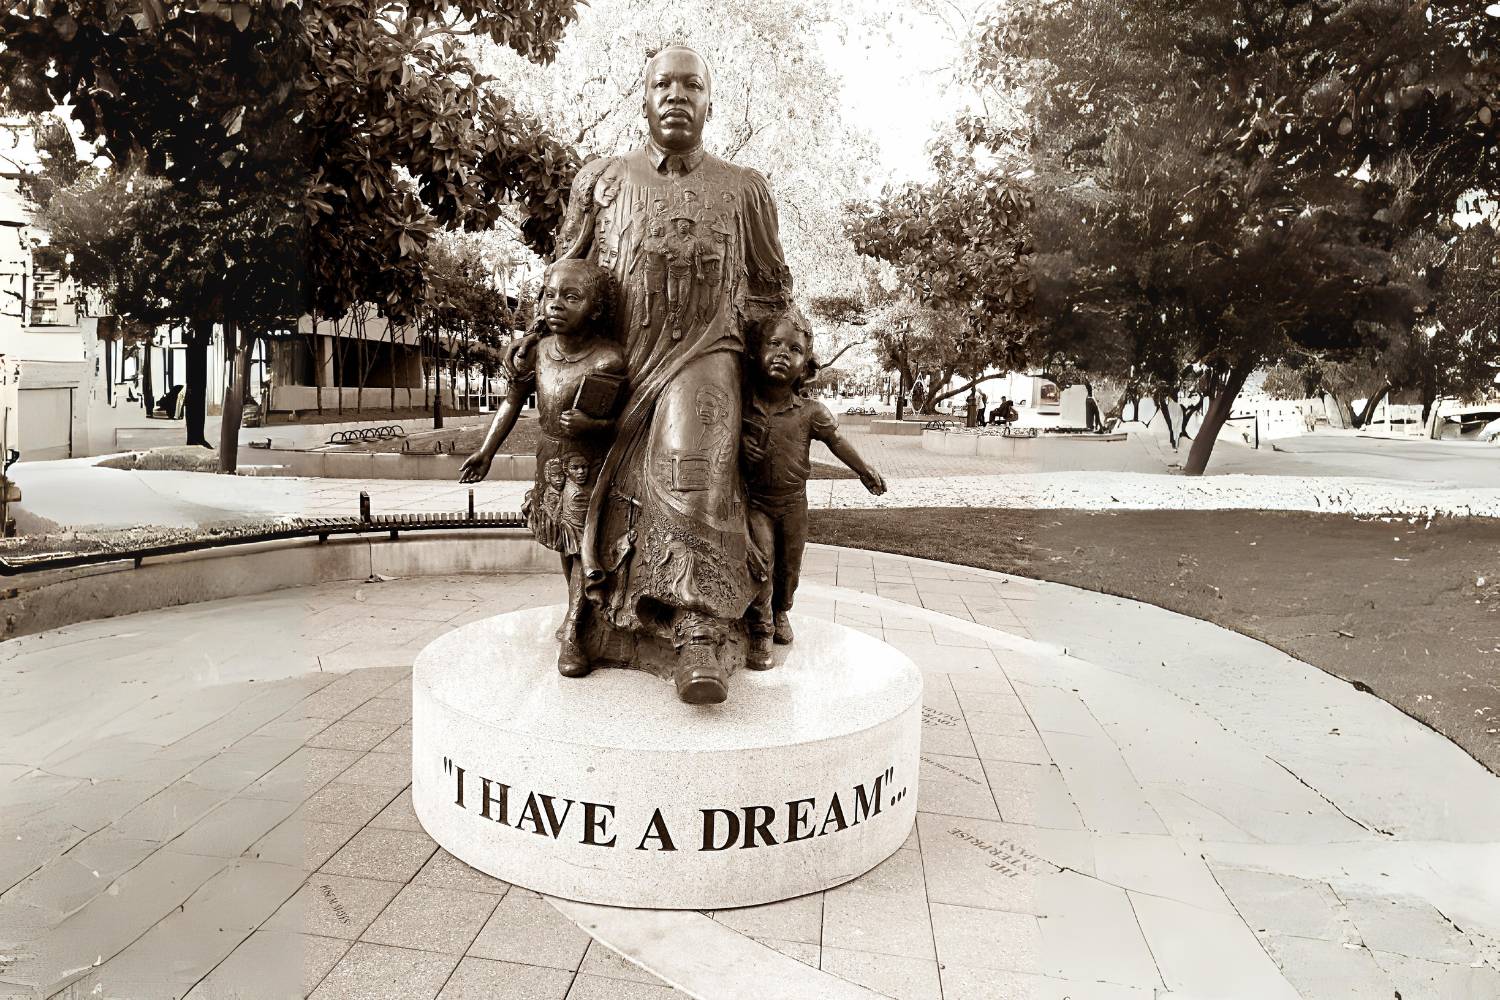 The "I have a dream" statue of Martin Luther King, Jr. located in Riverside, CA